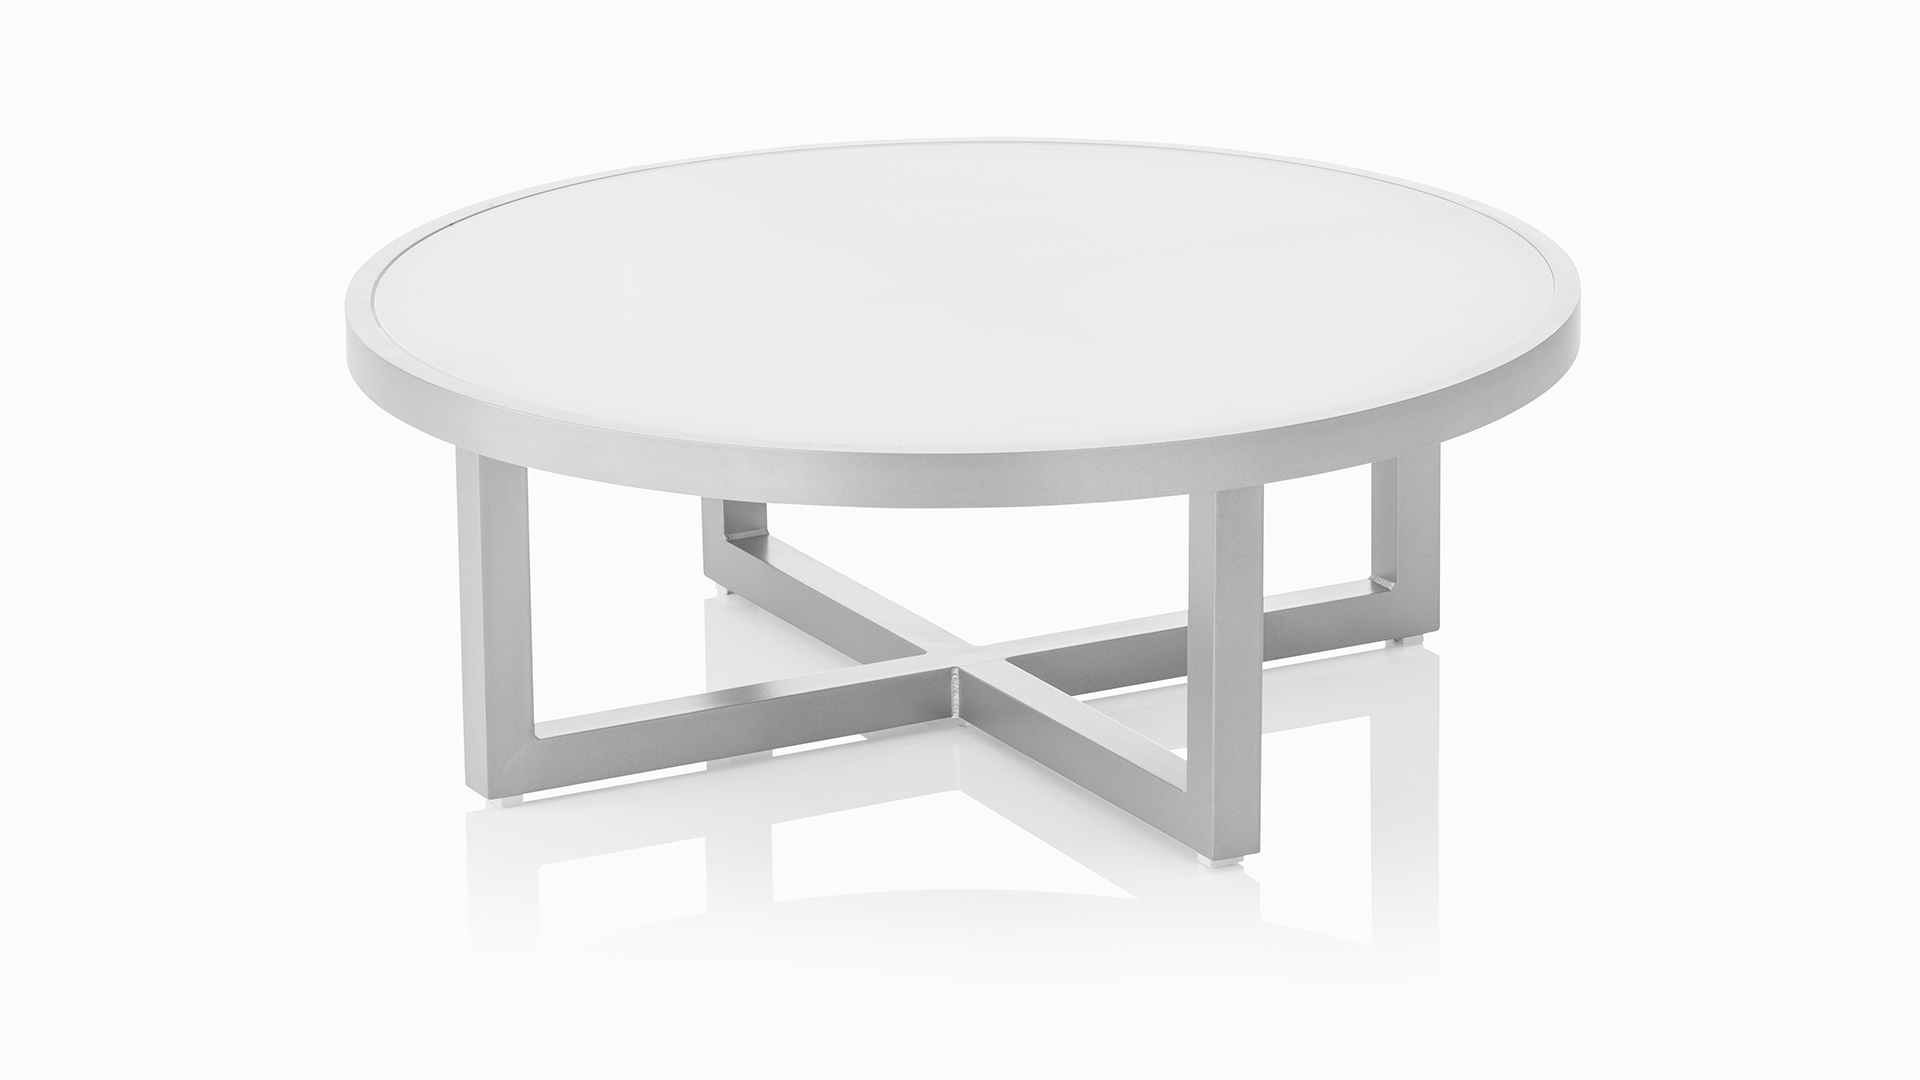 Lounge table 92 cm incl. 5 + glass top